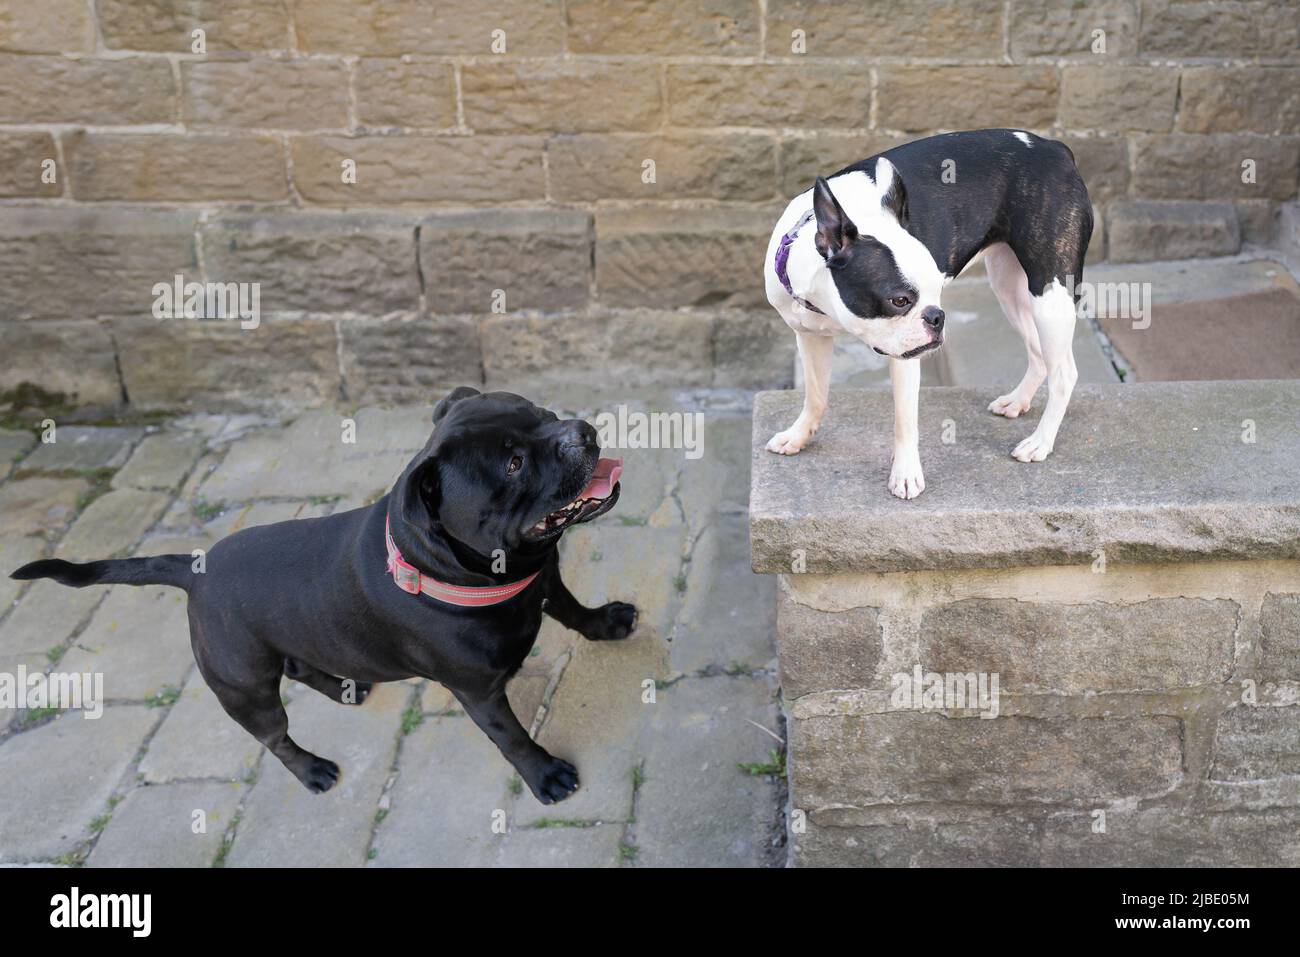 Boston Terrier standing on a stone wall with a Staffordshire Bull Terrier standing looking up from a lower level. Stock Photo